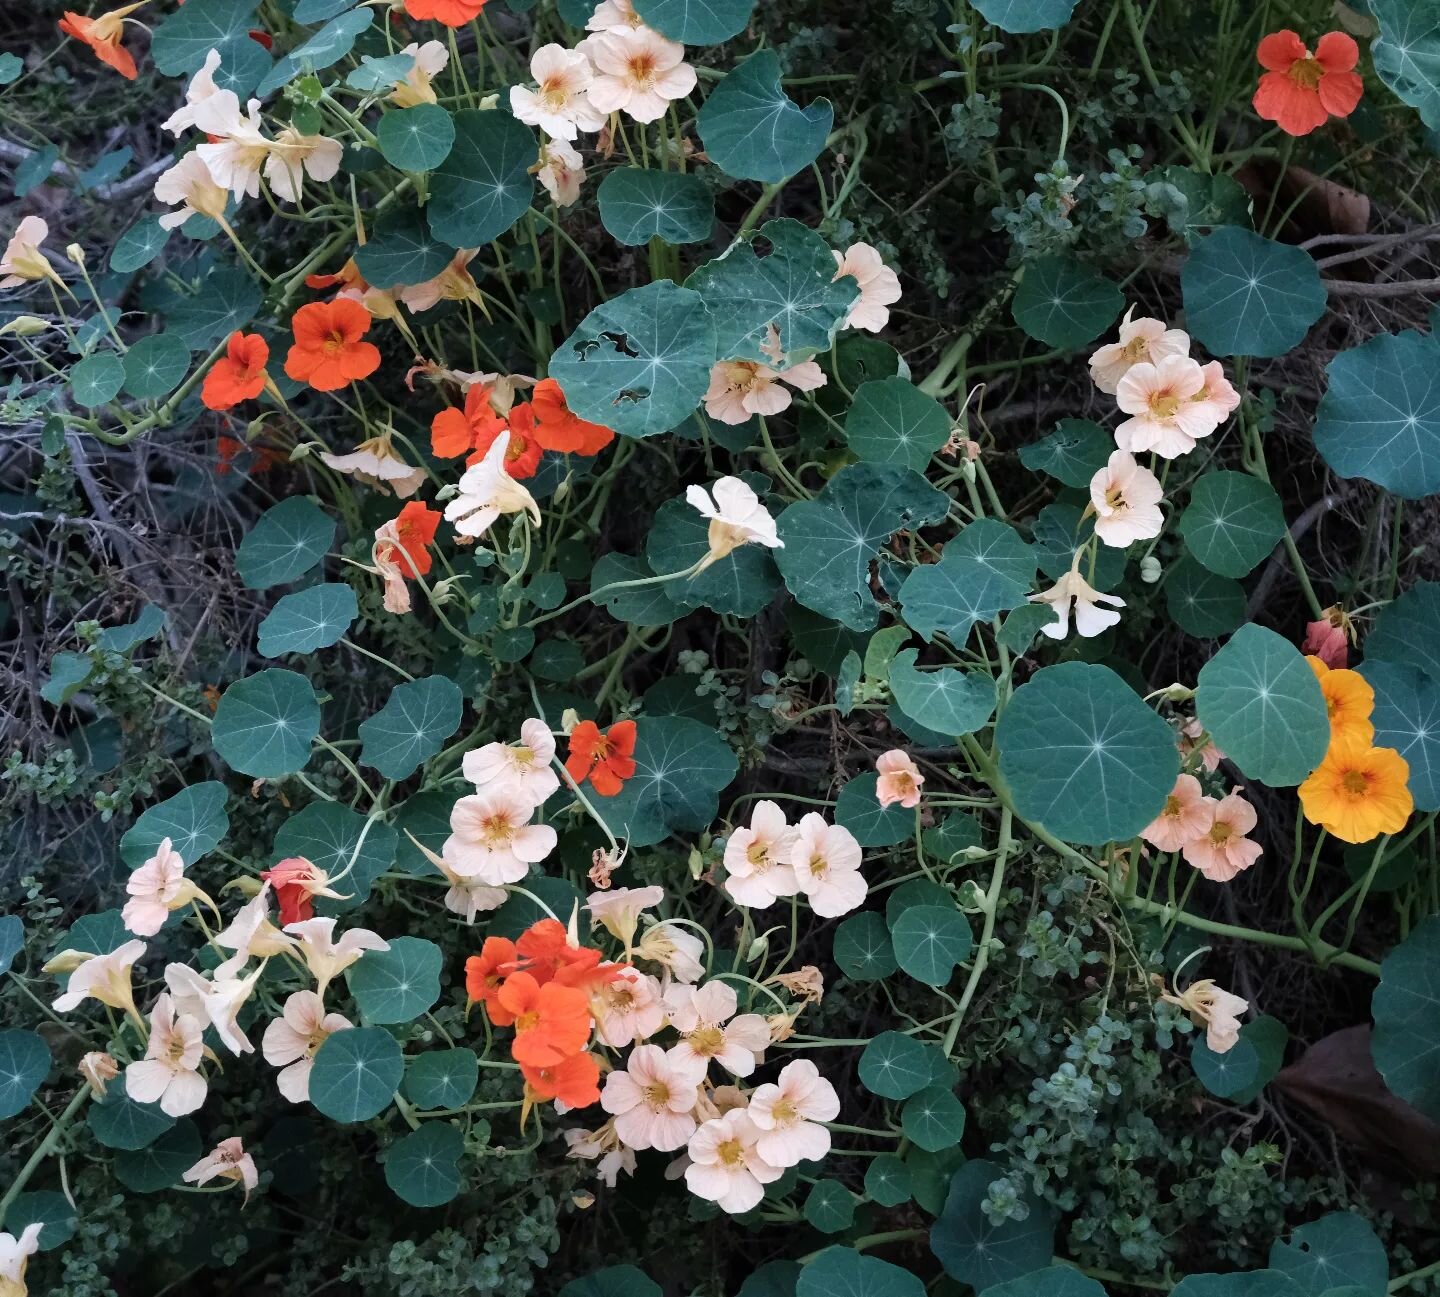 Sorting out the new #Fujifilm. Obsessed with all the #nasturtium springing up. Inspo for next works. 

#physicianartist